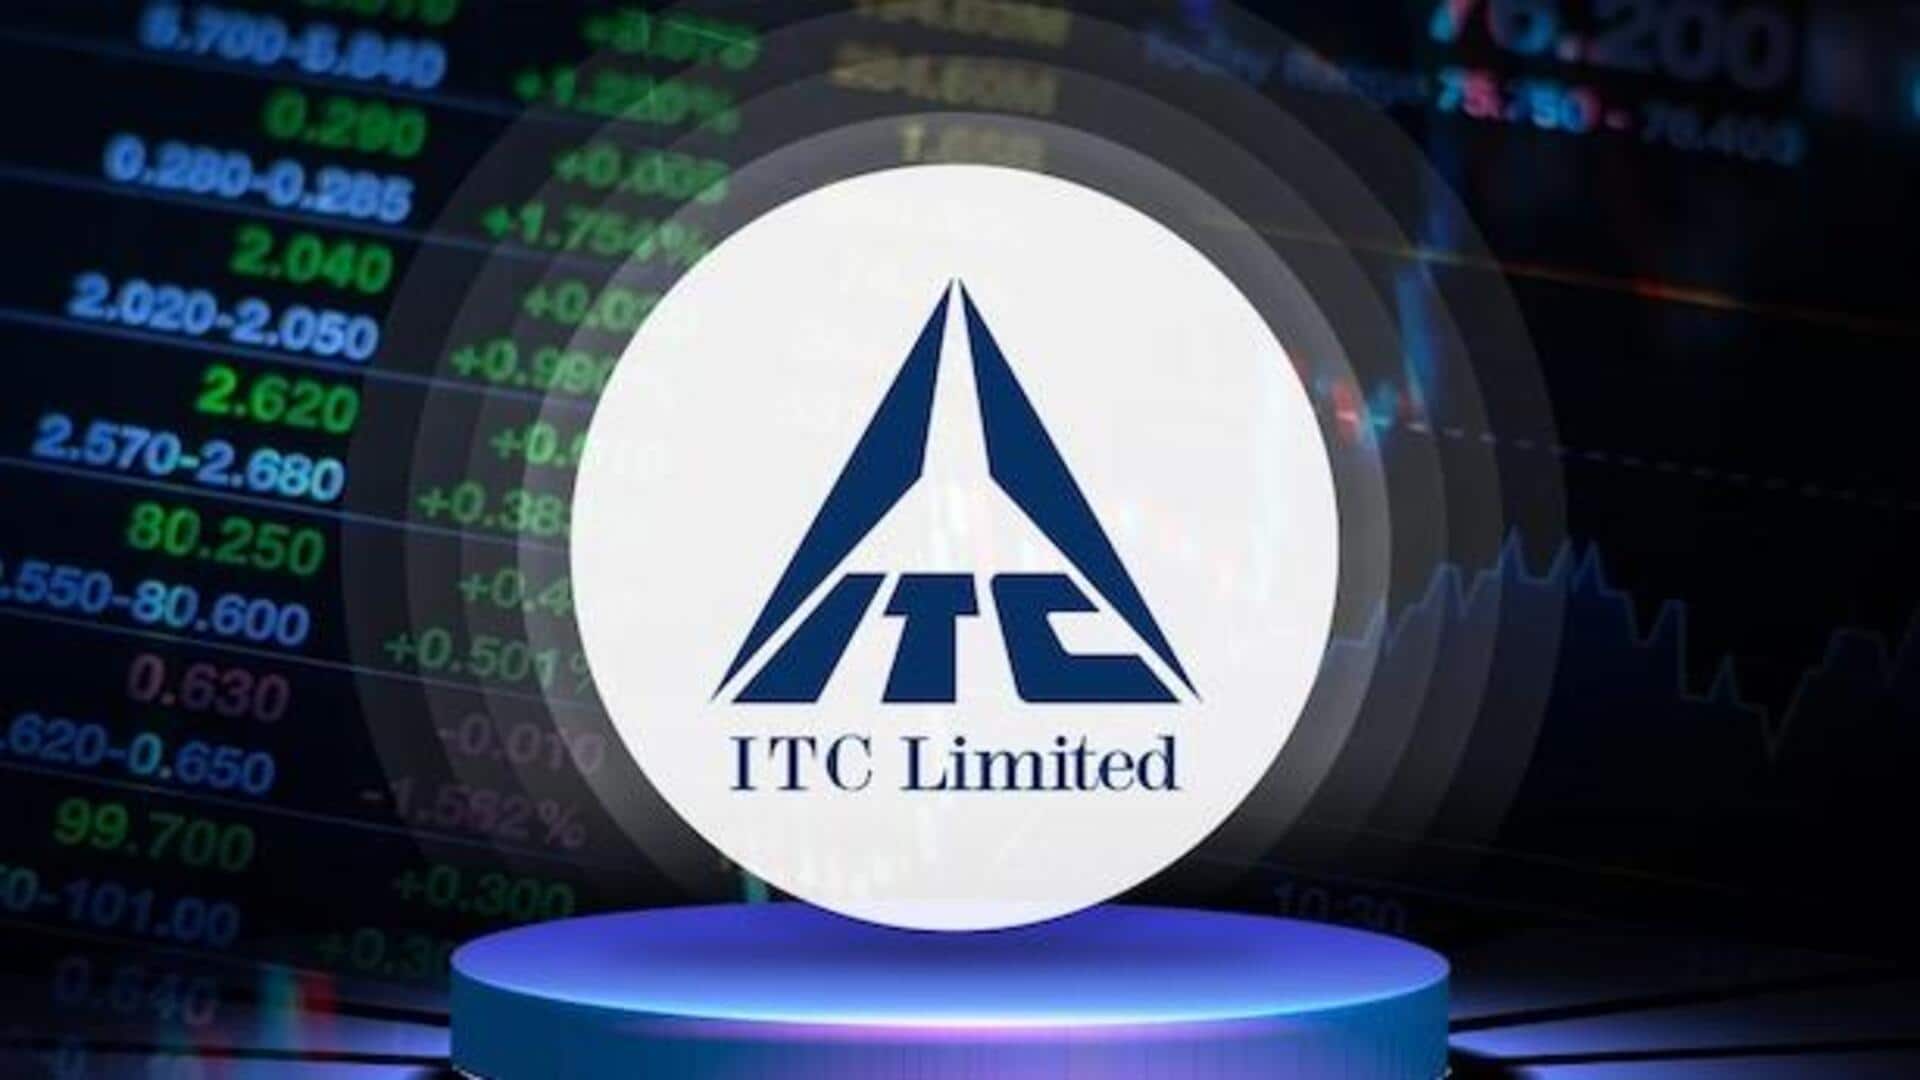 ITC overtakes Britannia in India's packaged food market rankings